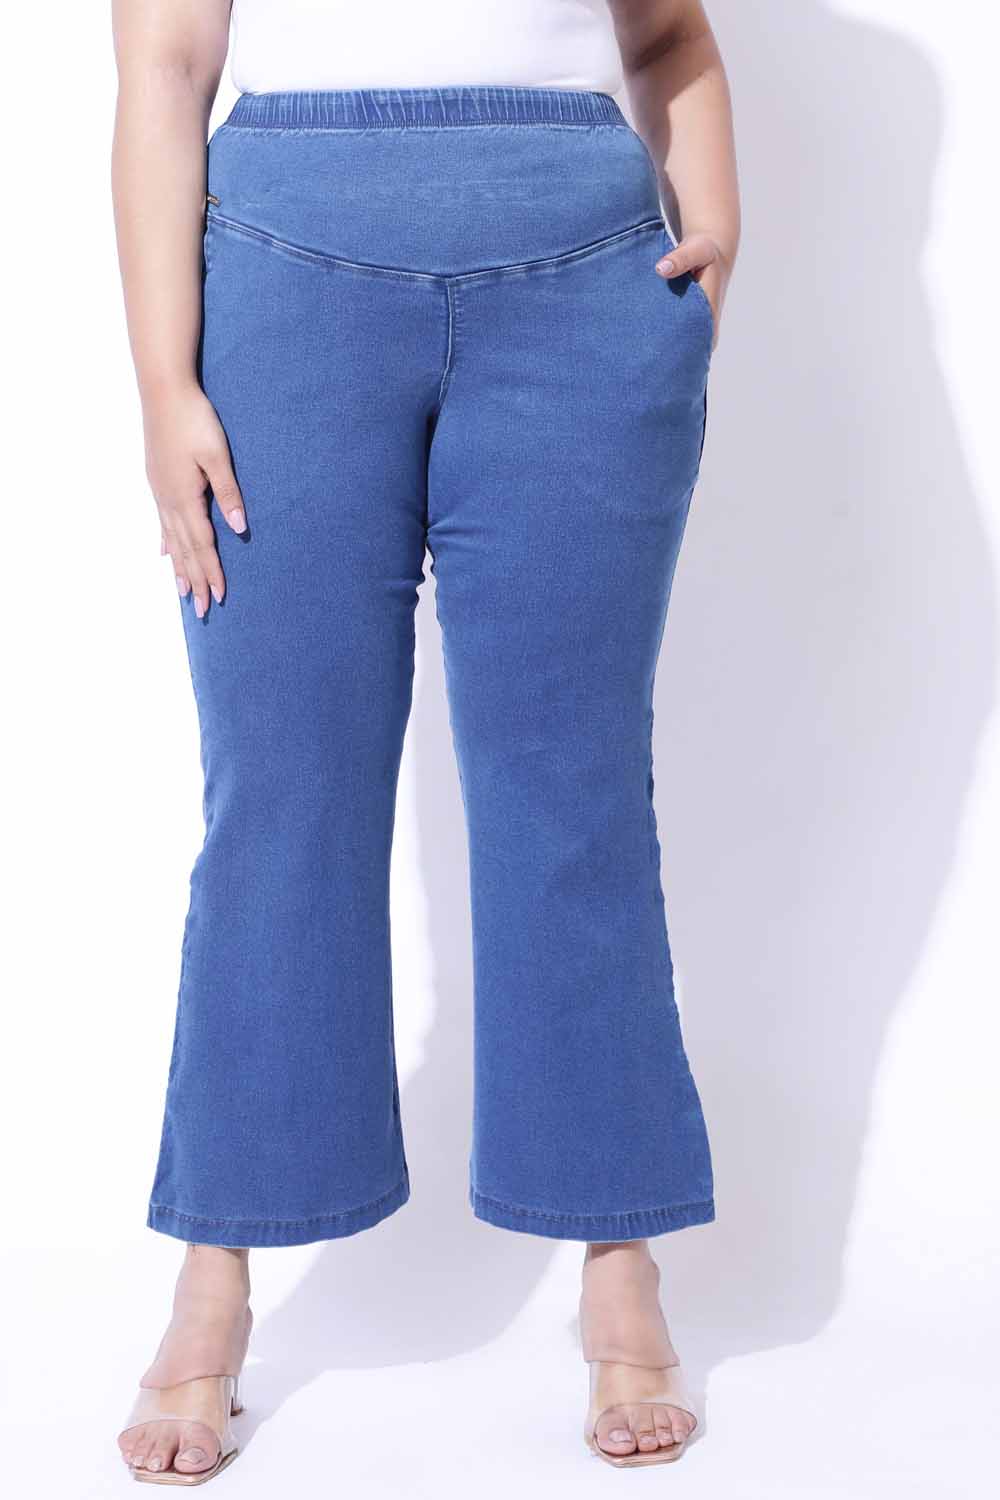 Plus Size Ice Blue High Waist Pants Online in India